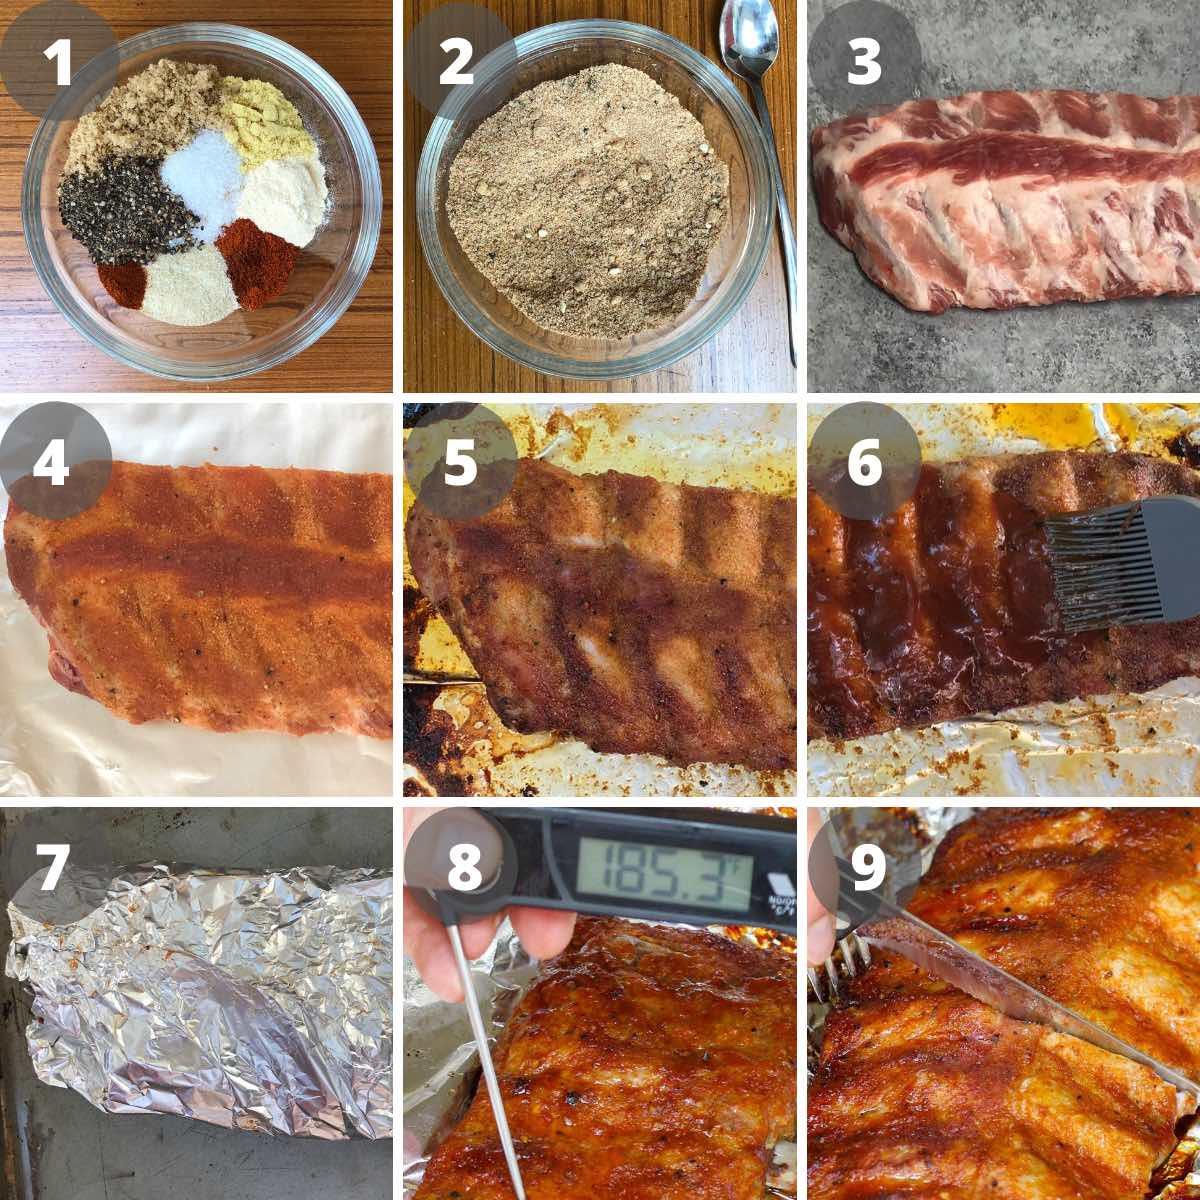 The key steps for baking ribs including seasoning, baking, saucing, and checking doneness